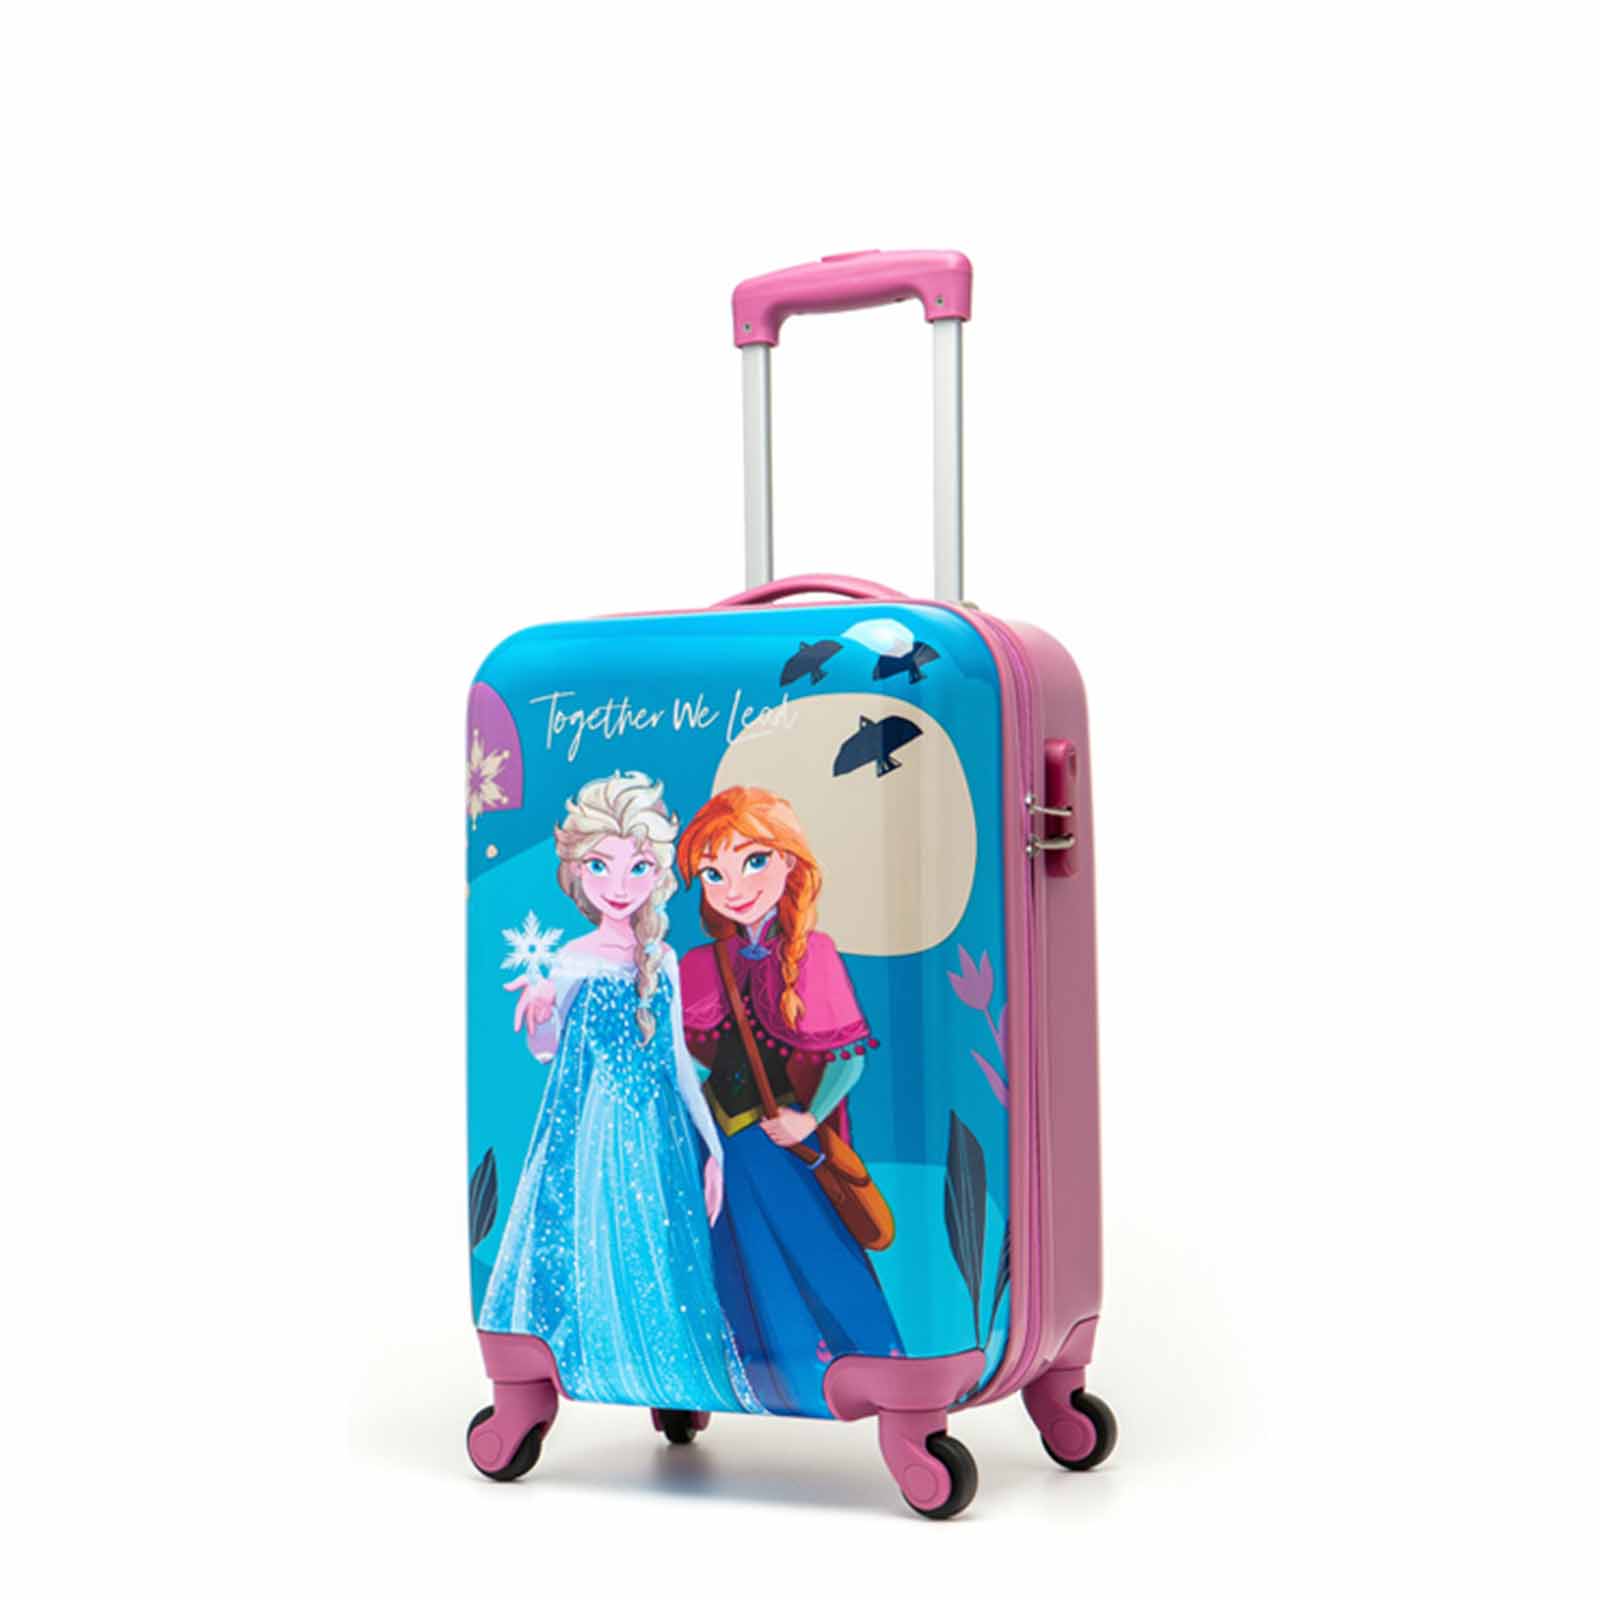 Disney-Frozen-20inch-Carry-On-Suitcase-Front-Angle